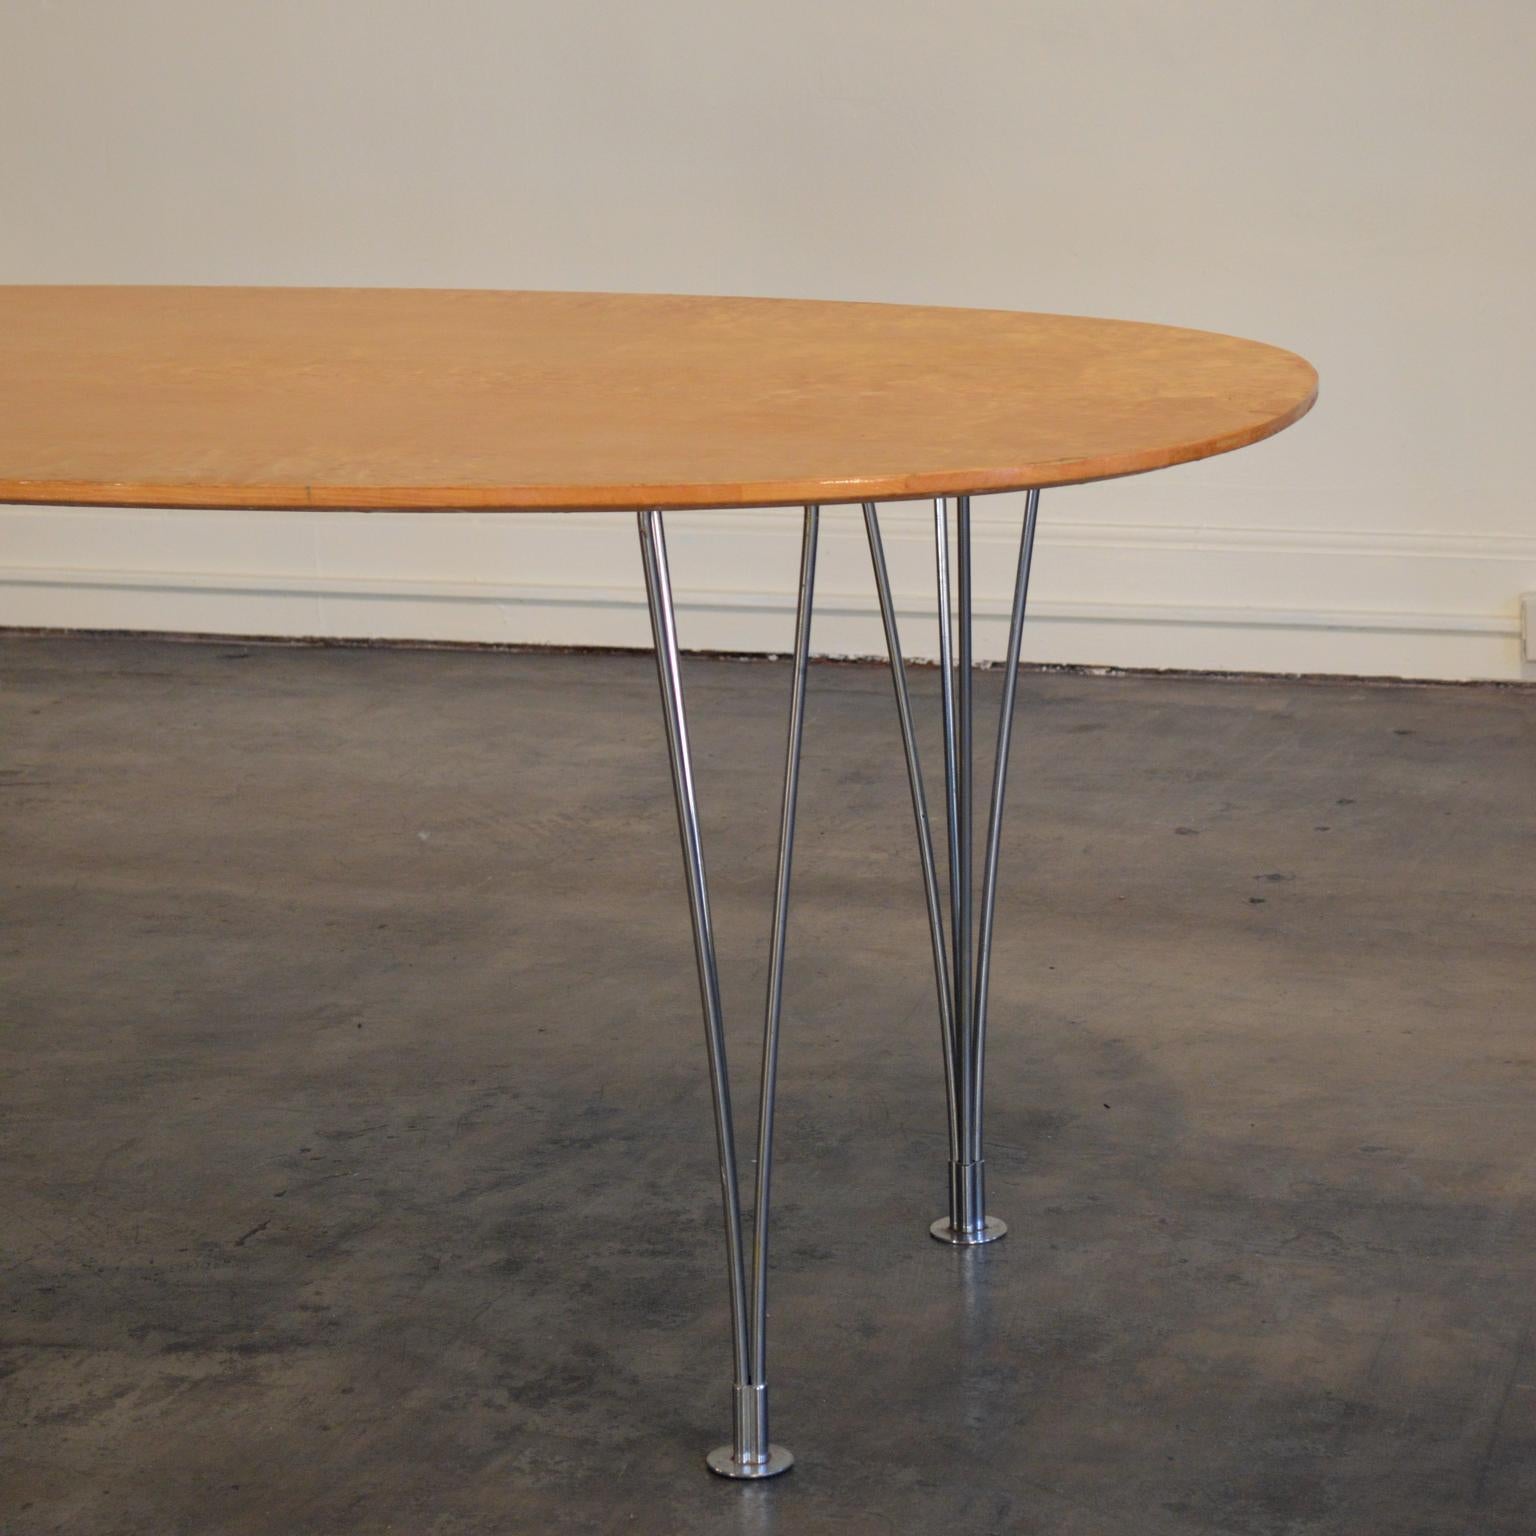 Vintage Super Ellipse Table by Bruno Mathsson in Masur Birch In Good Condition For Sale In Portland, ME